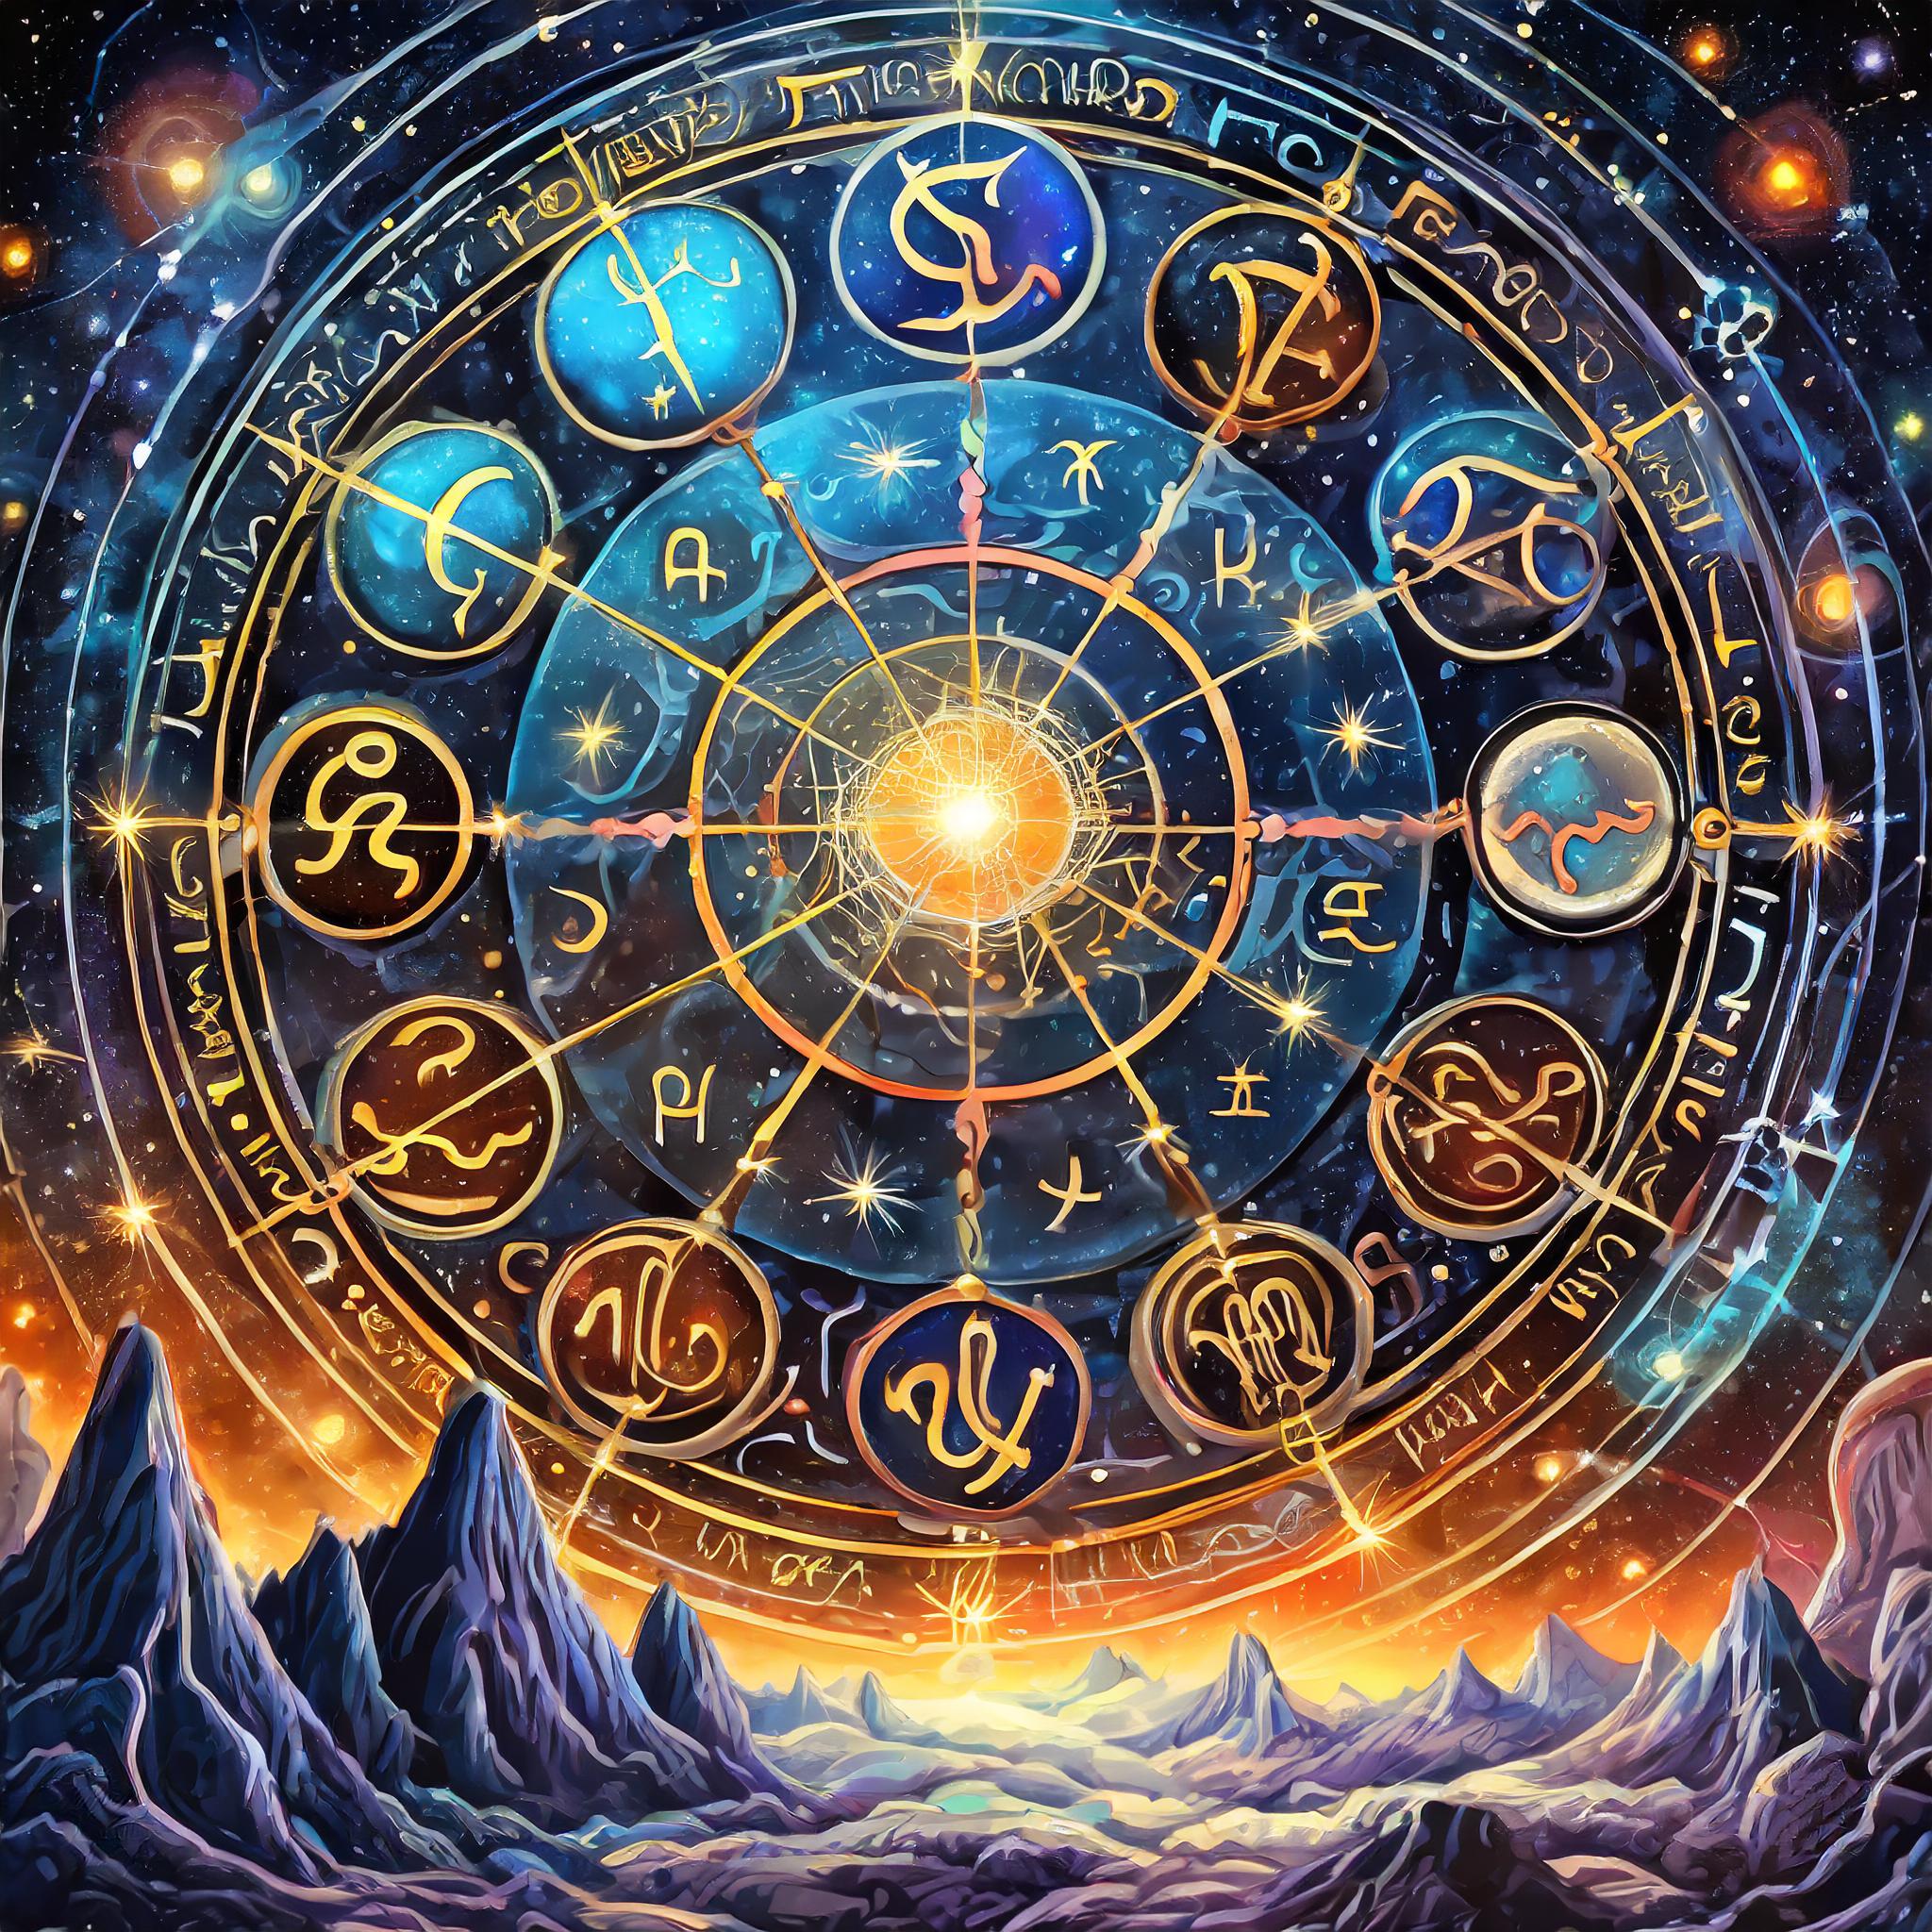 Astrology in Modern Occultism